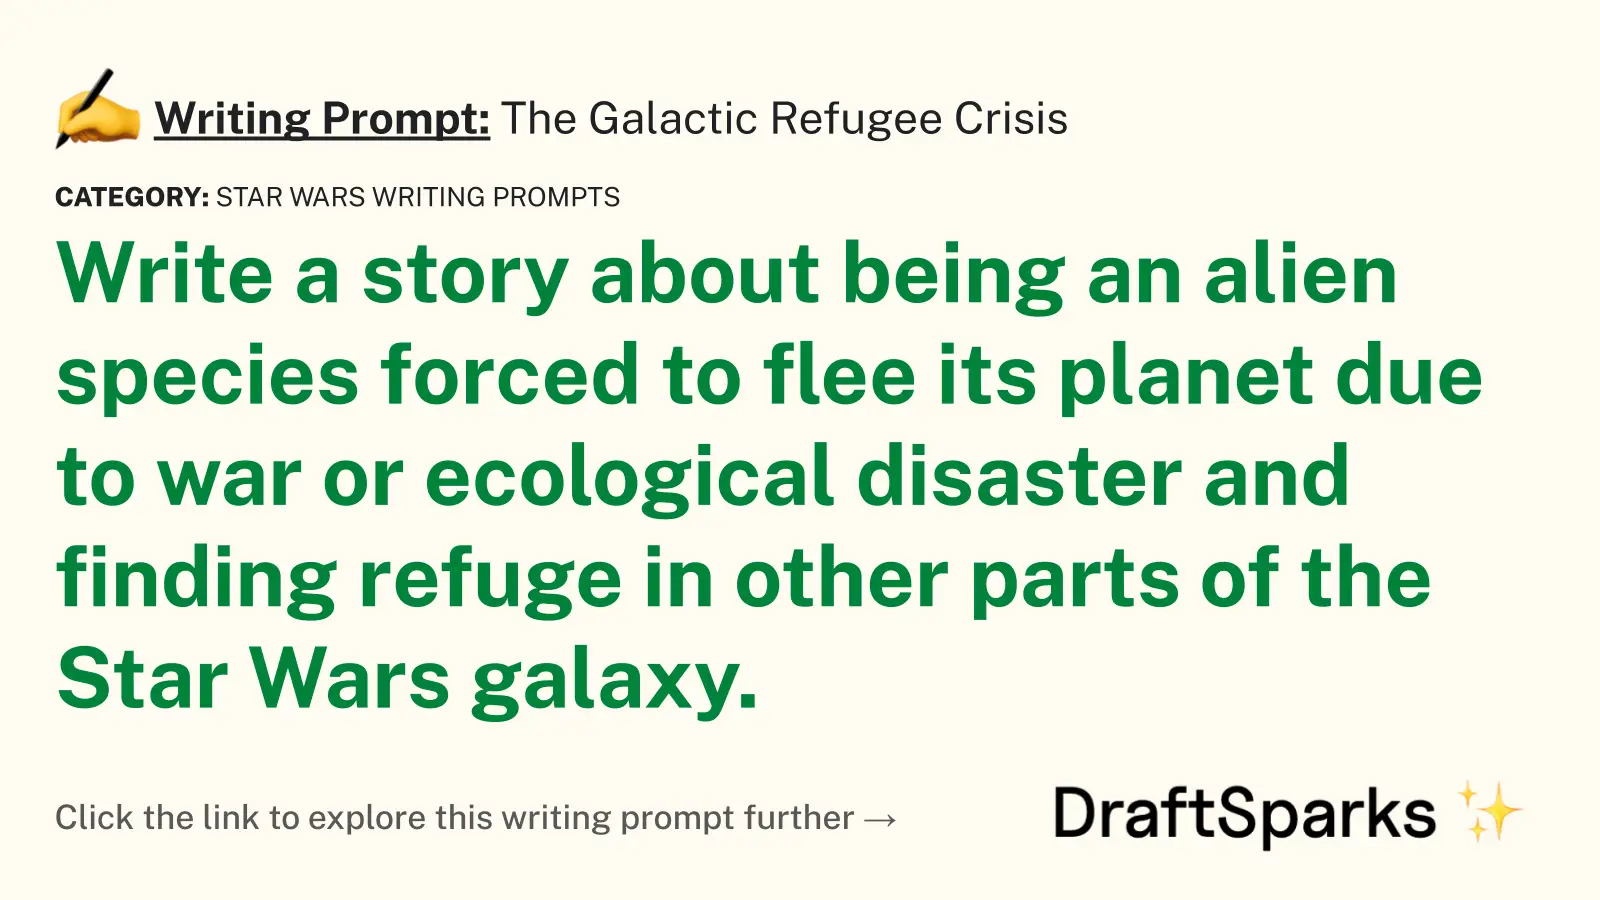 The Galactic Refugee Crisis